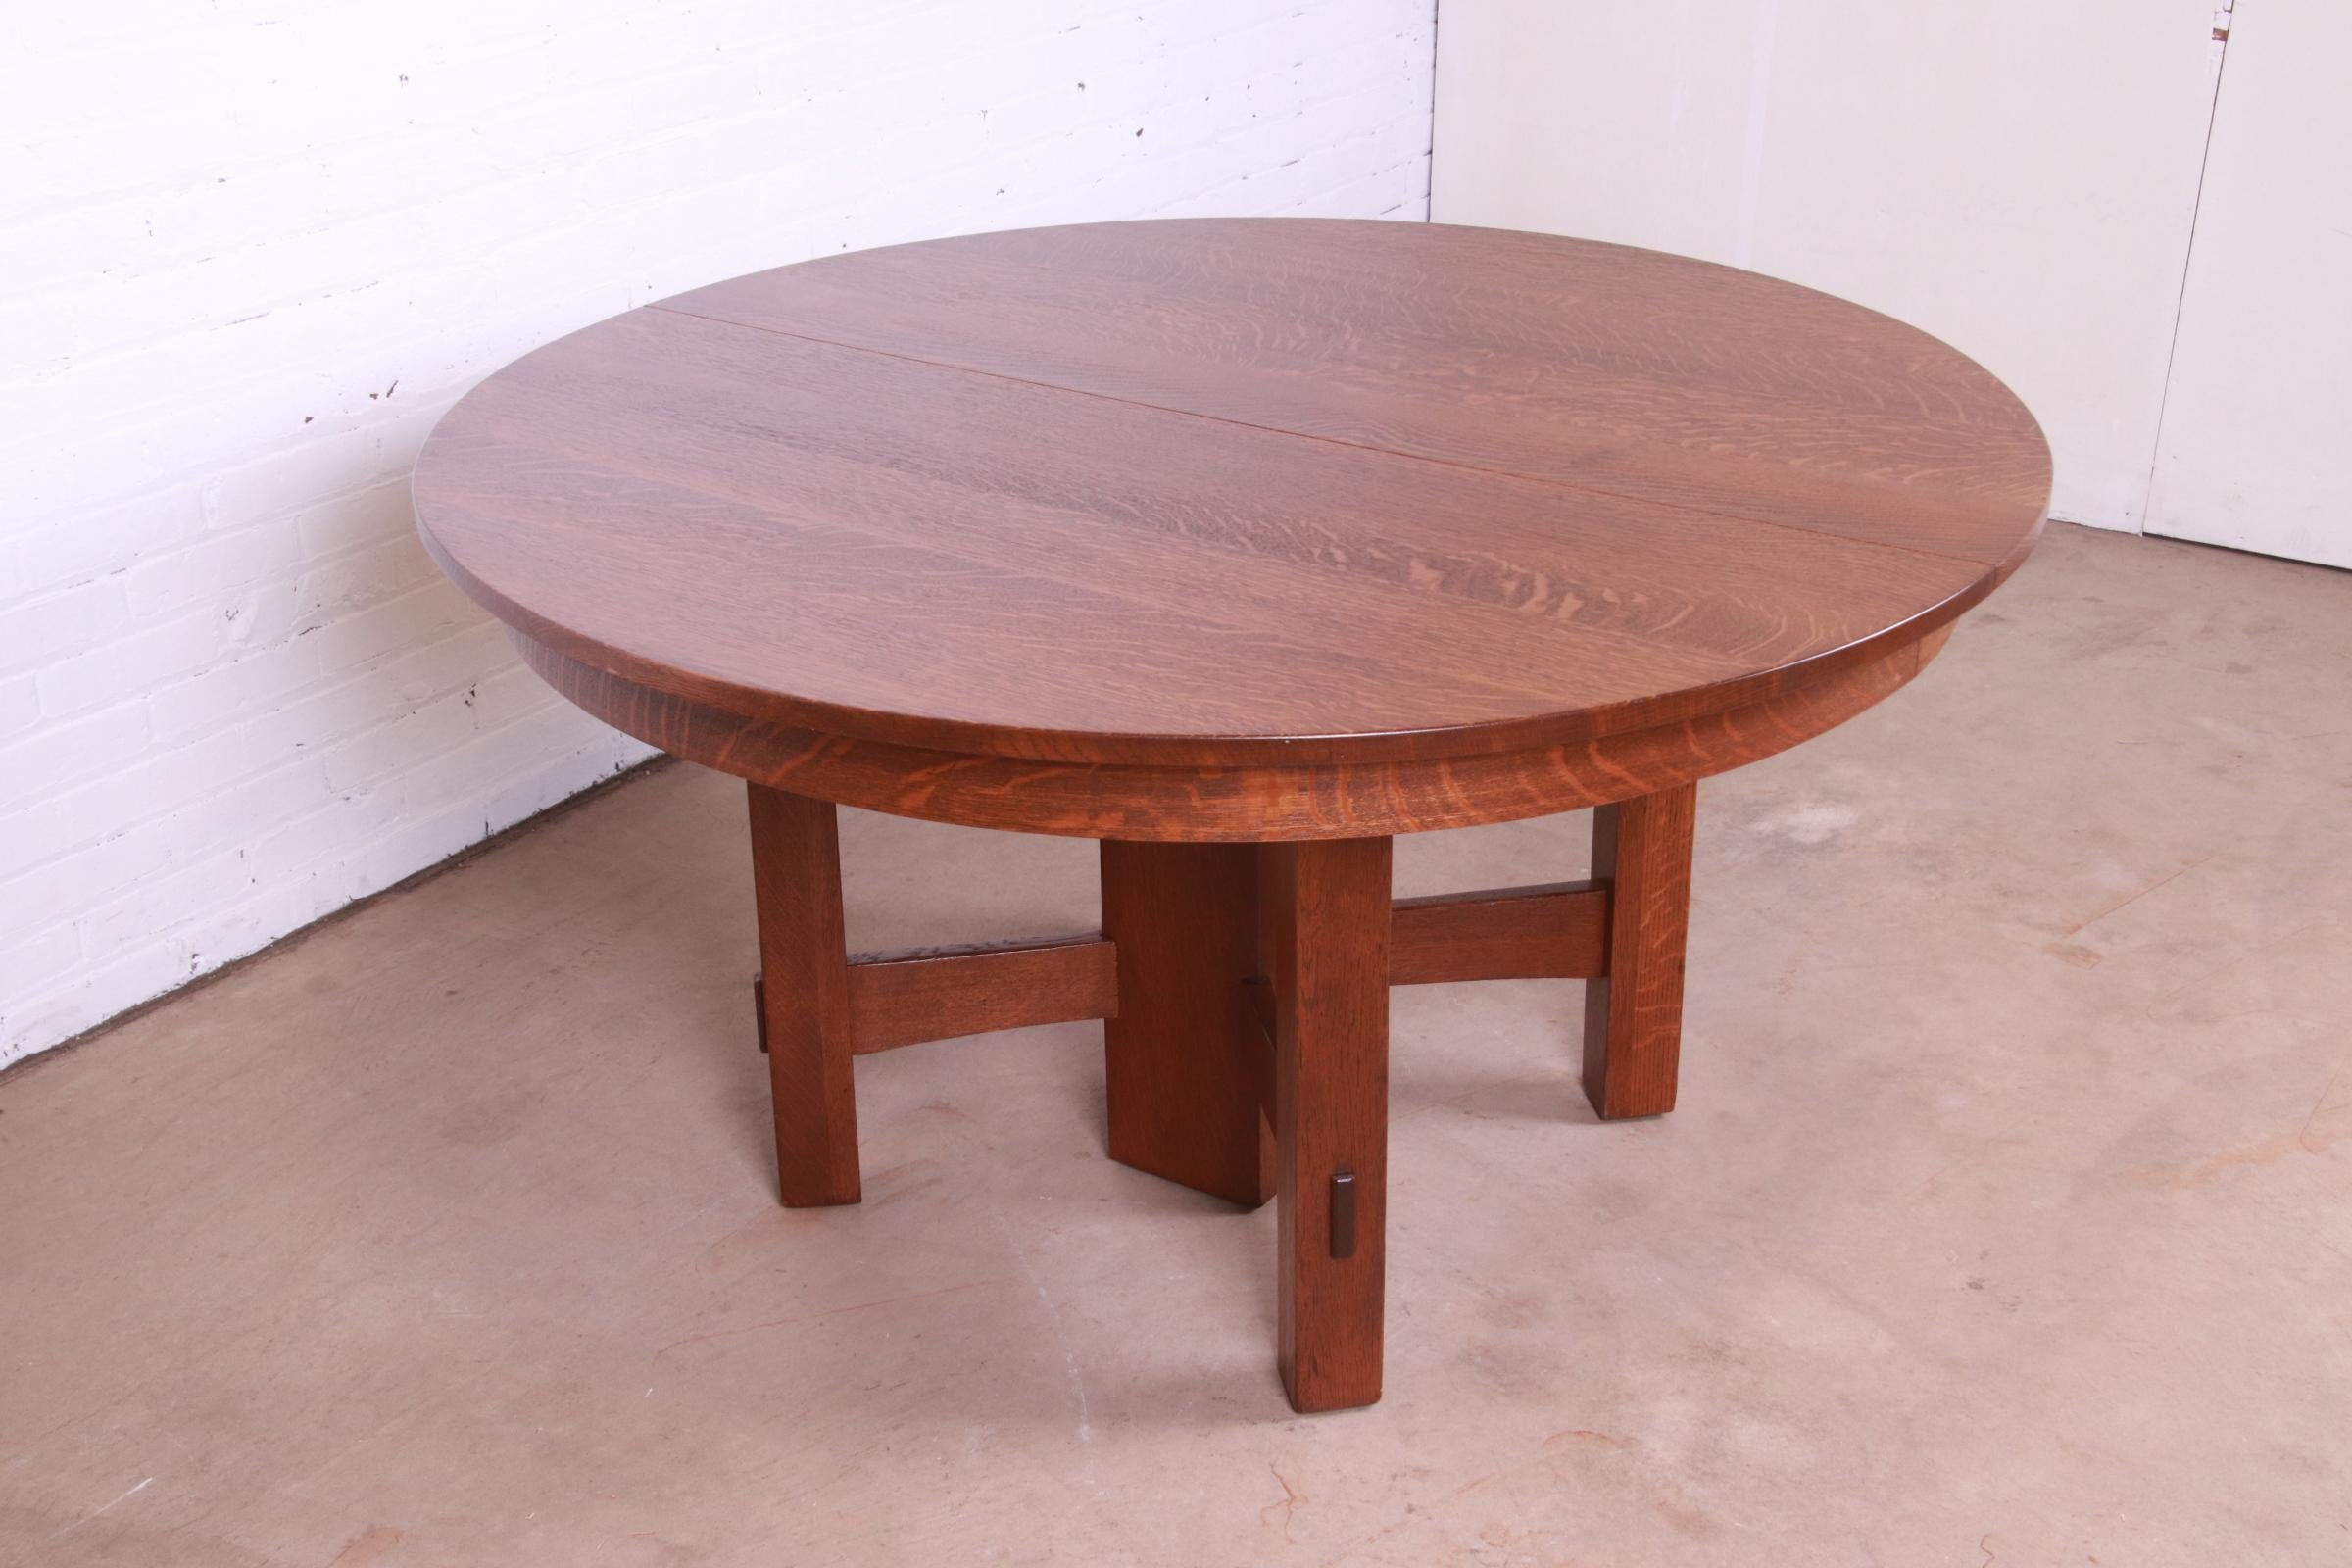 20th Century Antique Stickley Mission Oak Arts & Crafts Pedestal Dining Table with Six Leaves